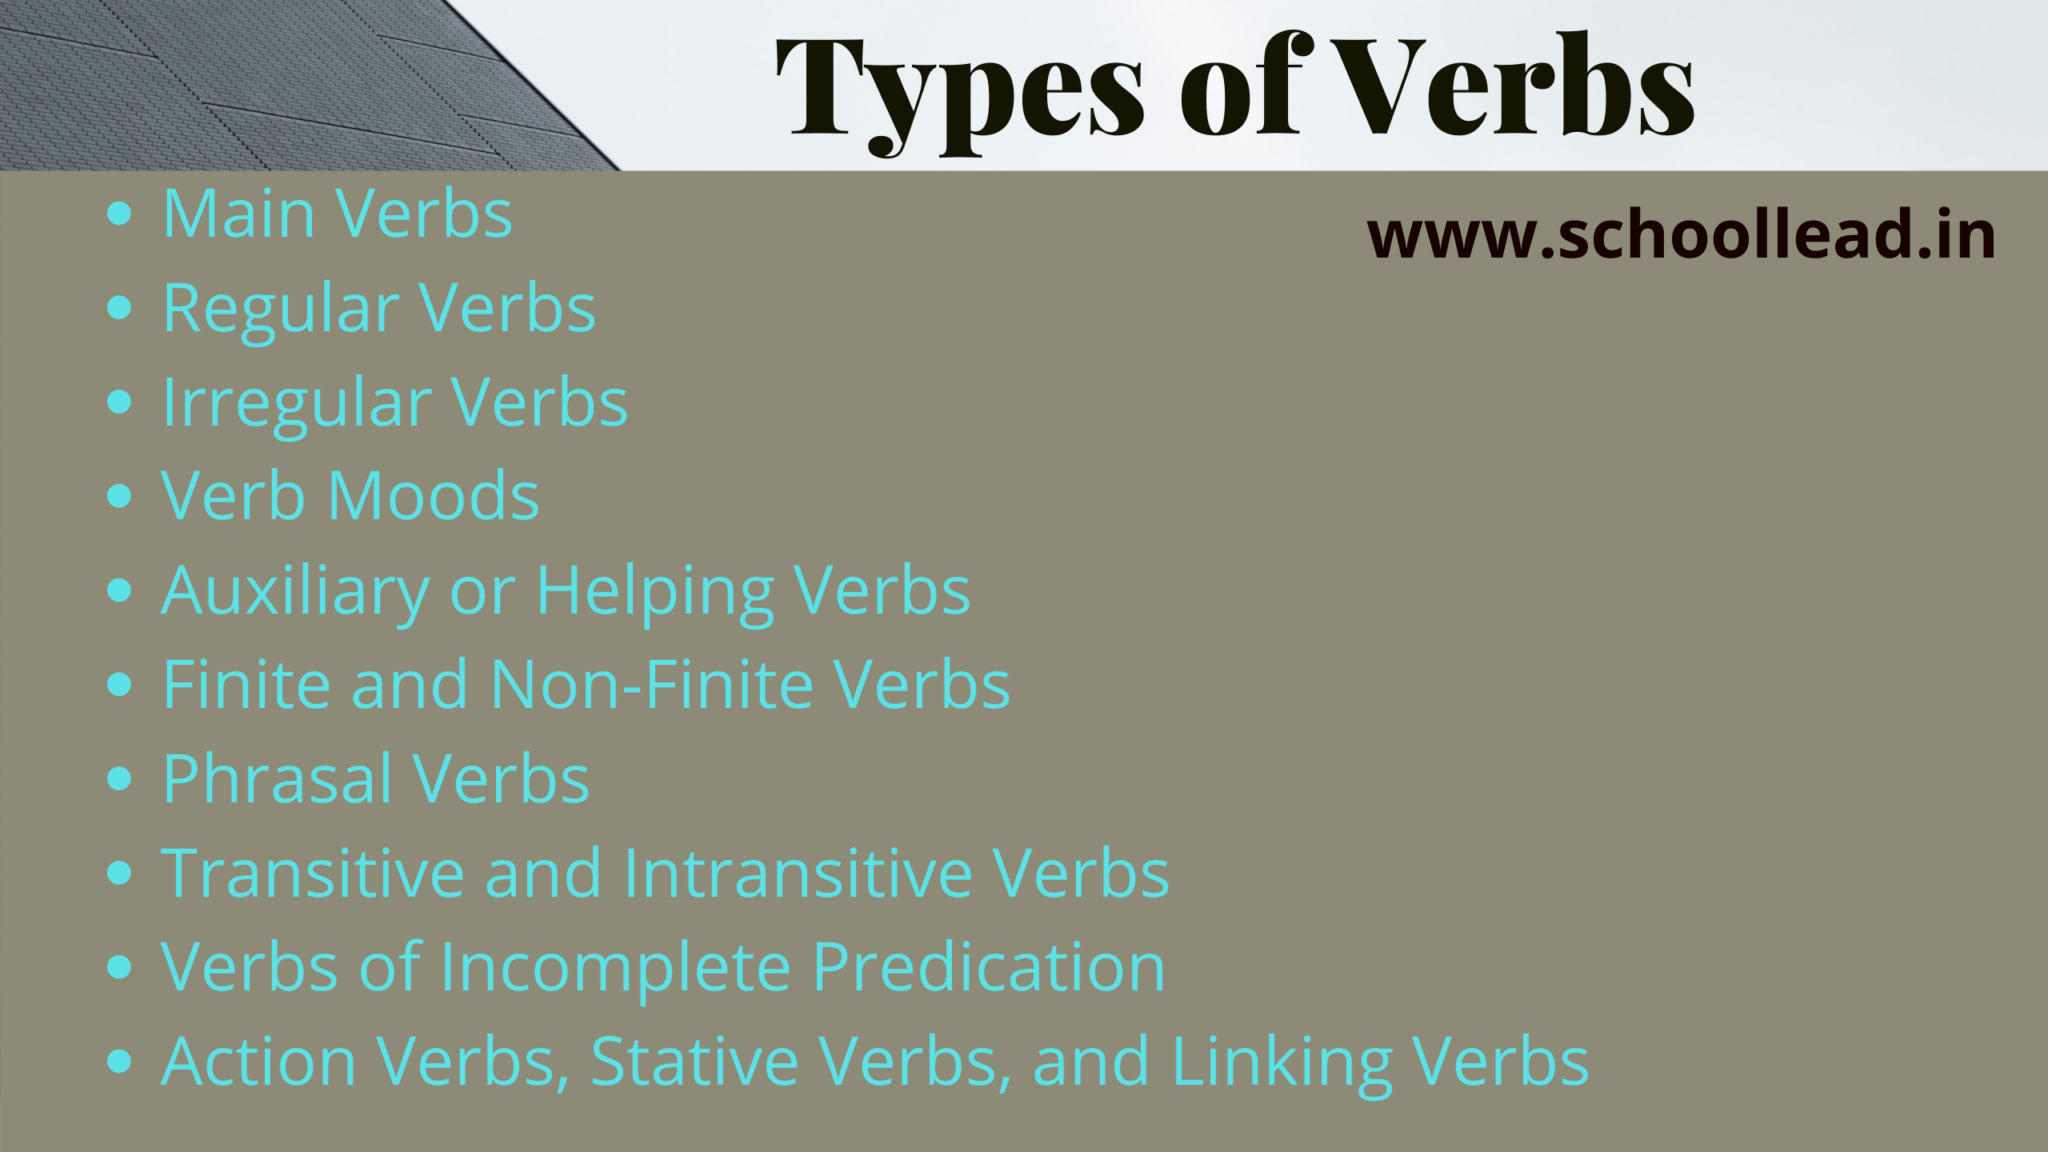 what-is-a-verb-in-english-the-verb-school-lead